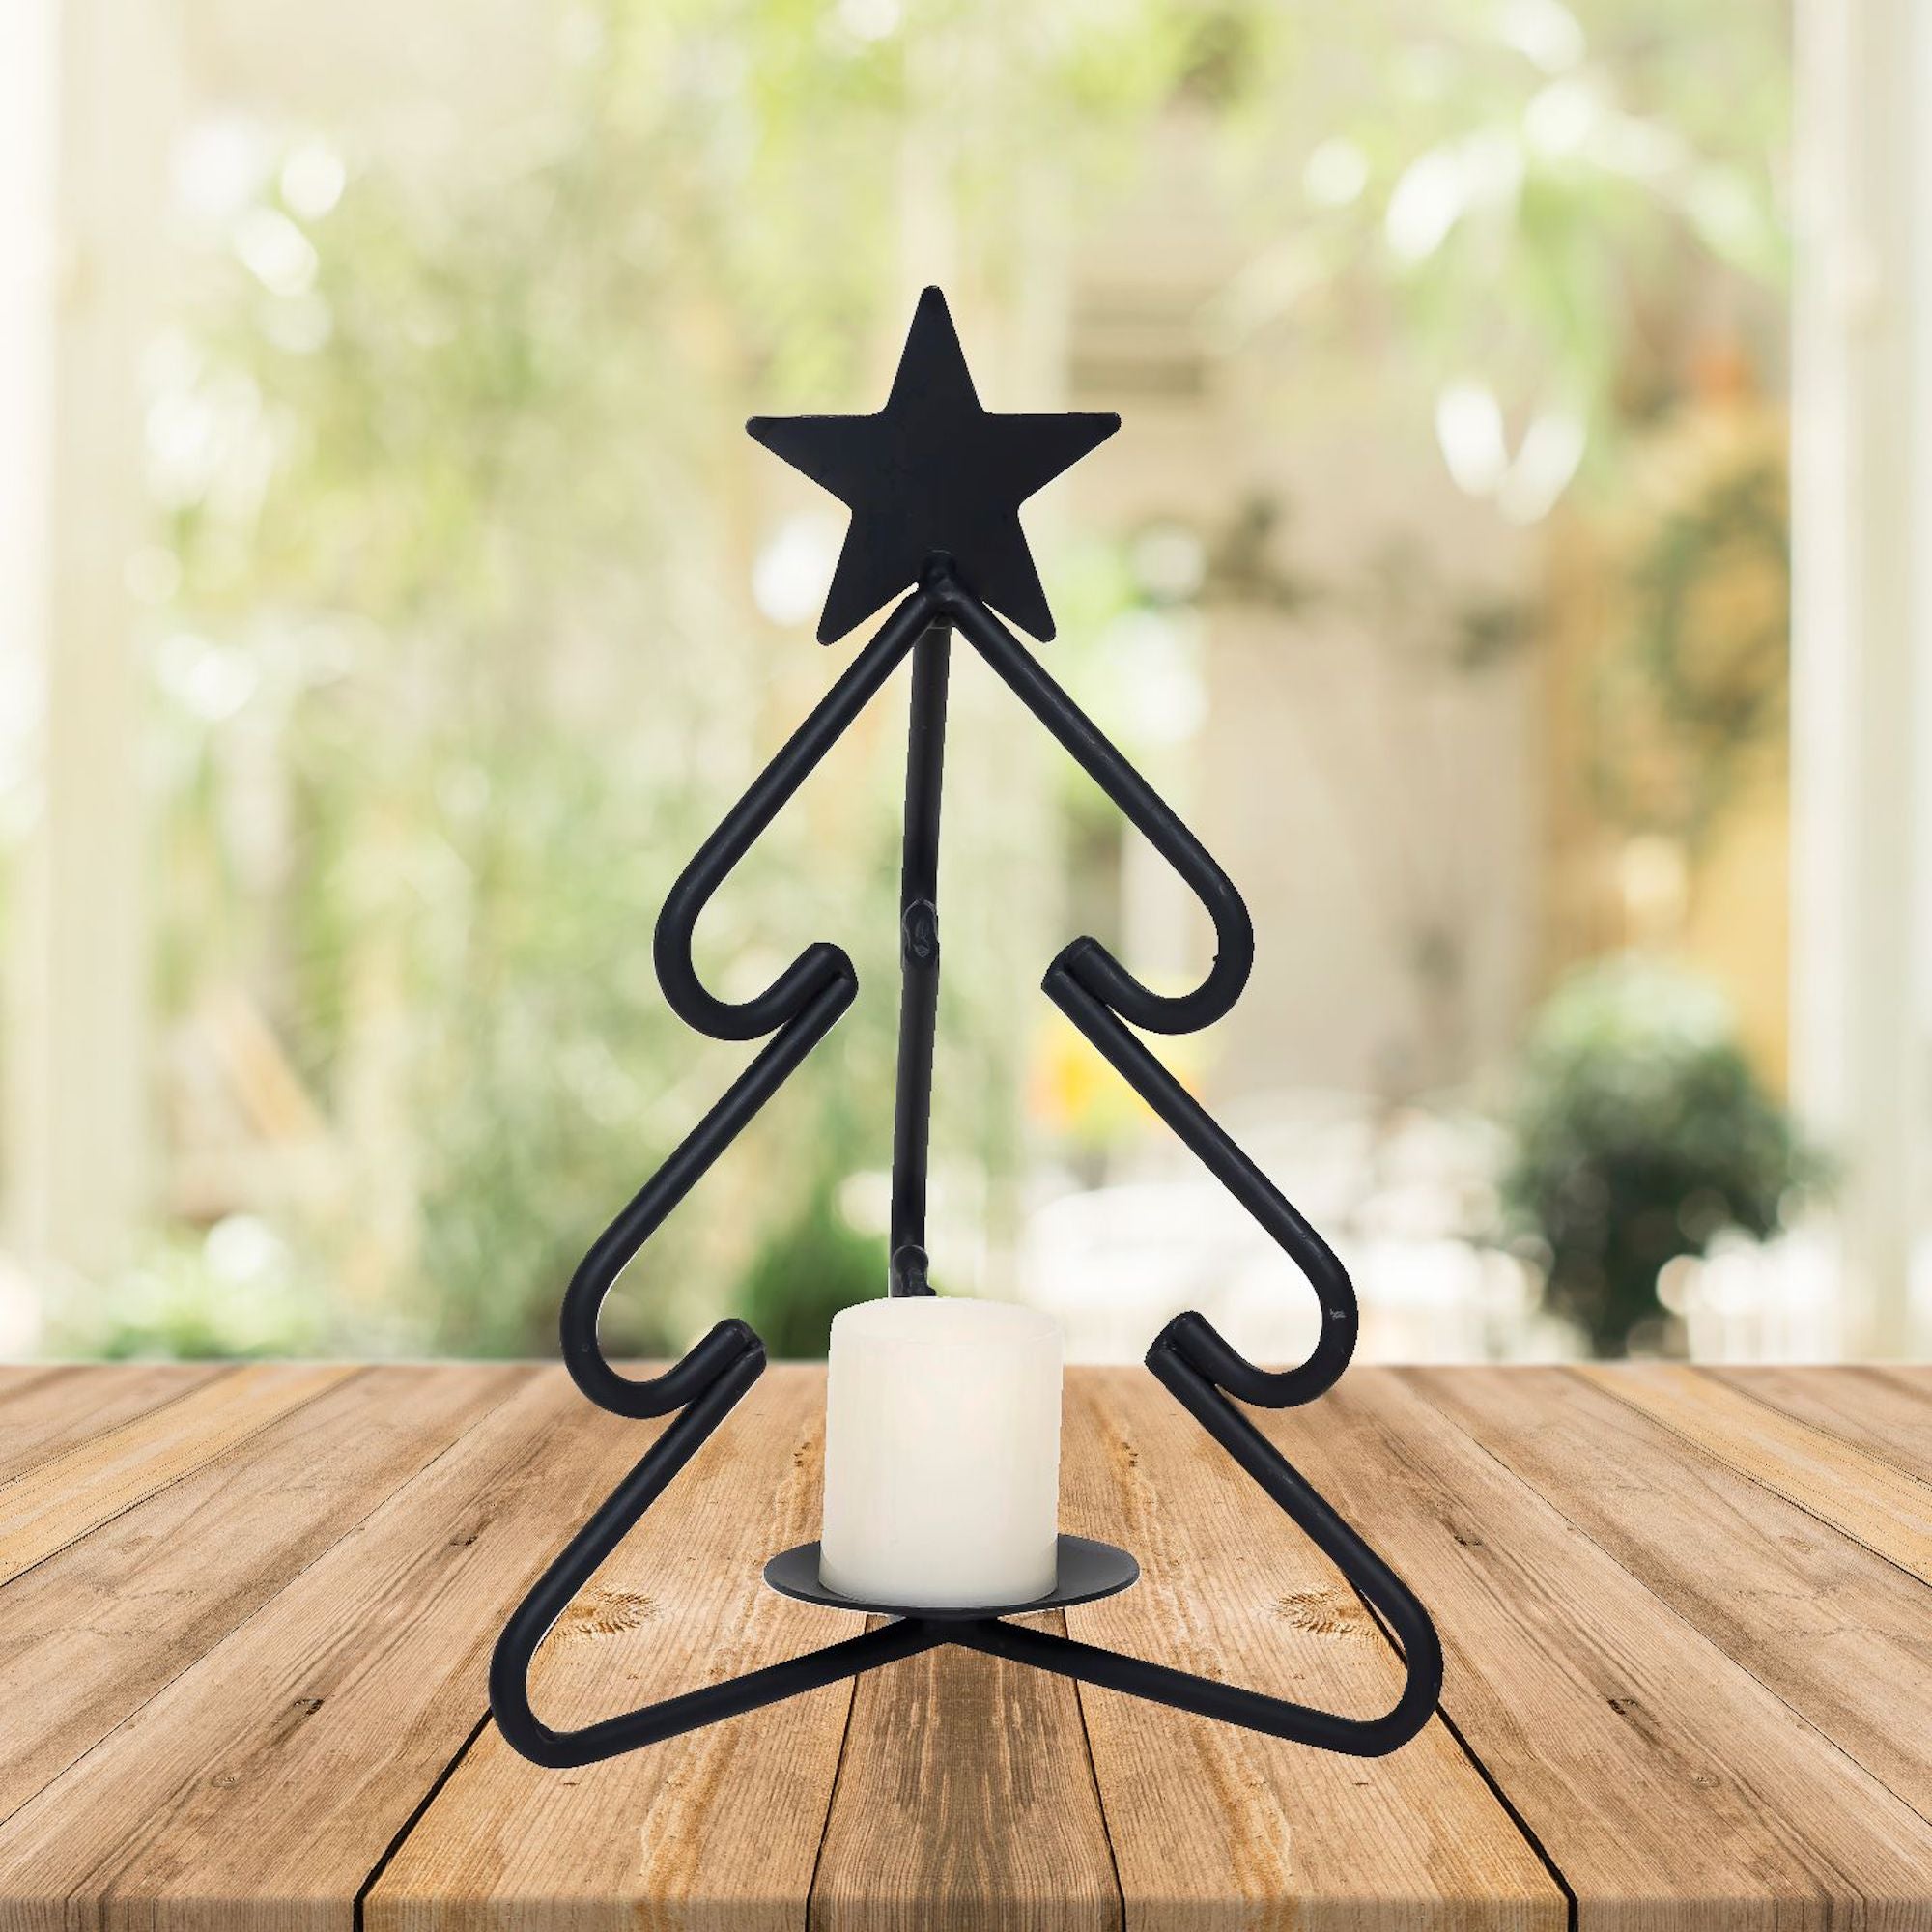 Wrought Iron Christmas Tree Tea Light Candle Holder - MADE IN THE USA